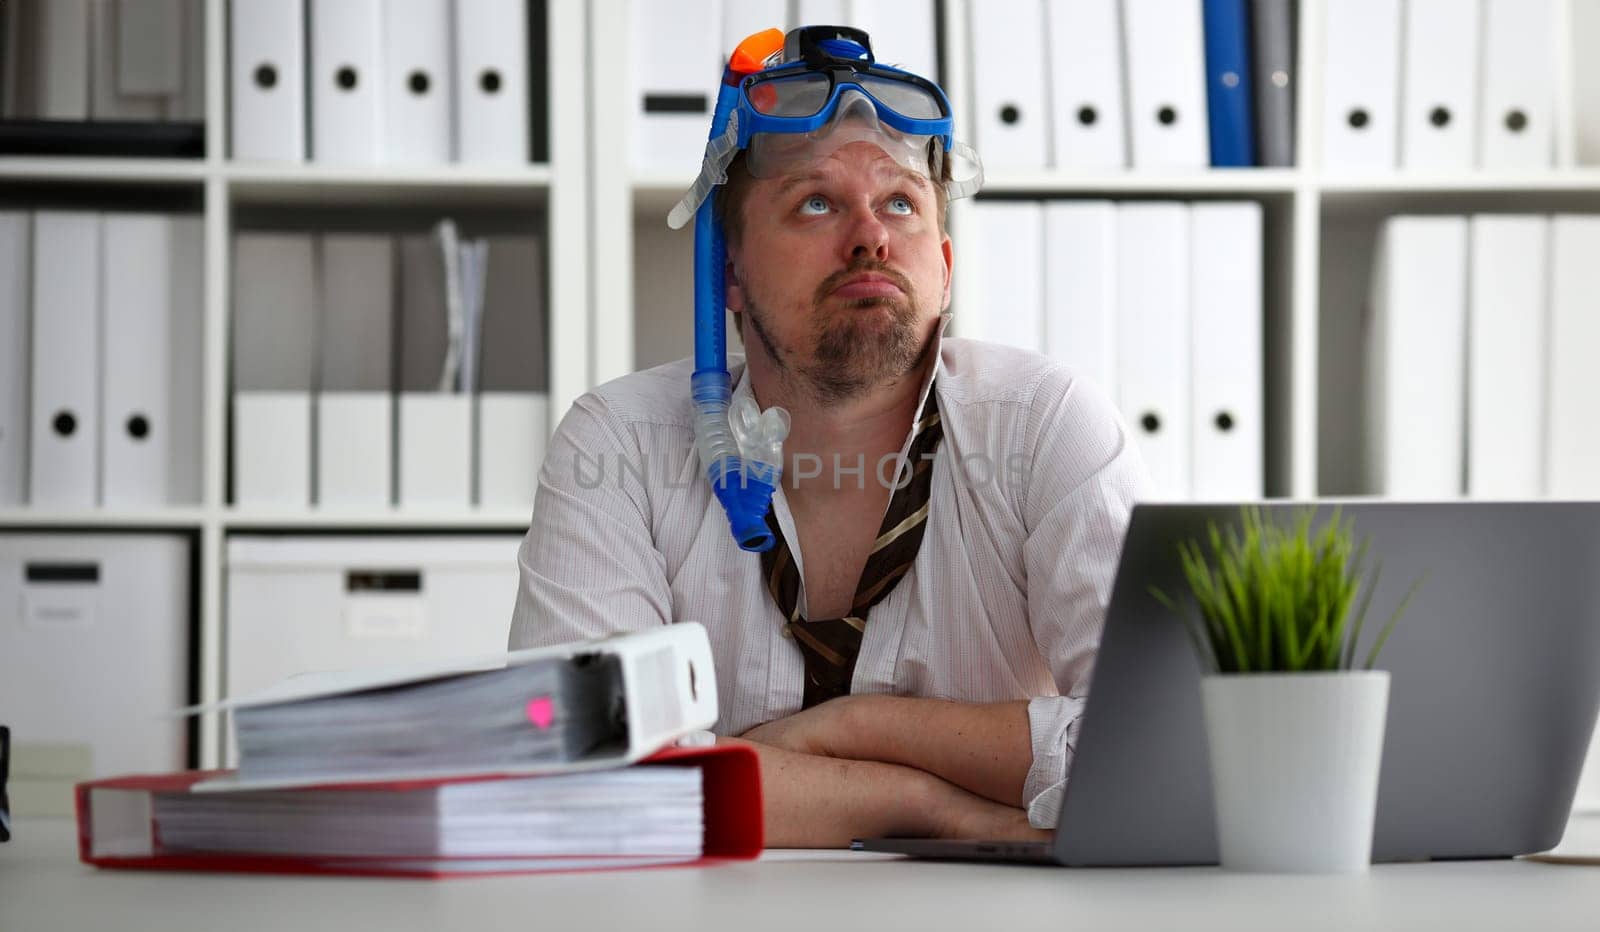 Man wearing suit and tie in goggles with snorkel sit at office workplace ready to take off portrait. Count days to leave annual day off workaholic freedom fun tourism resort idea concept